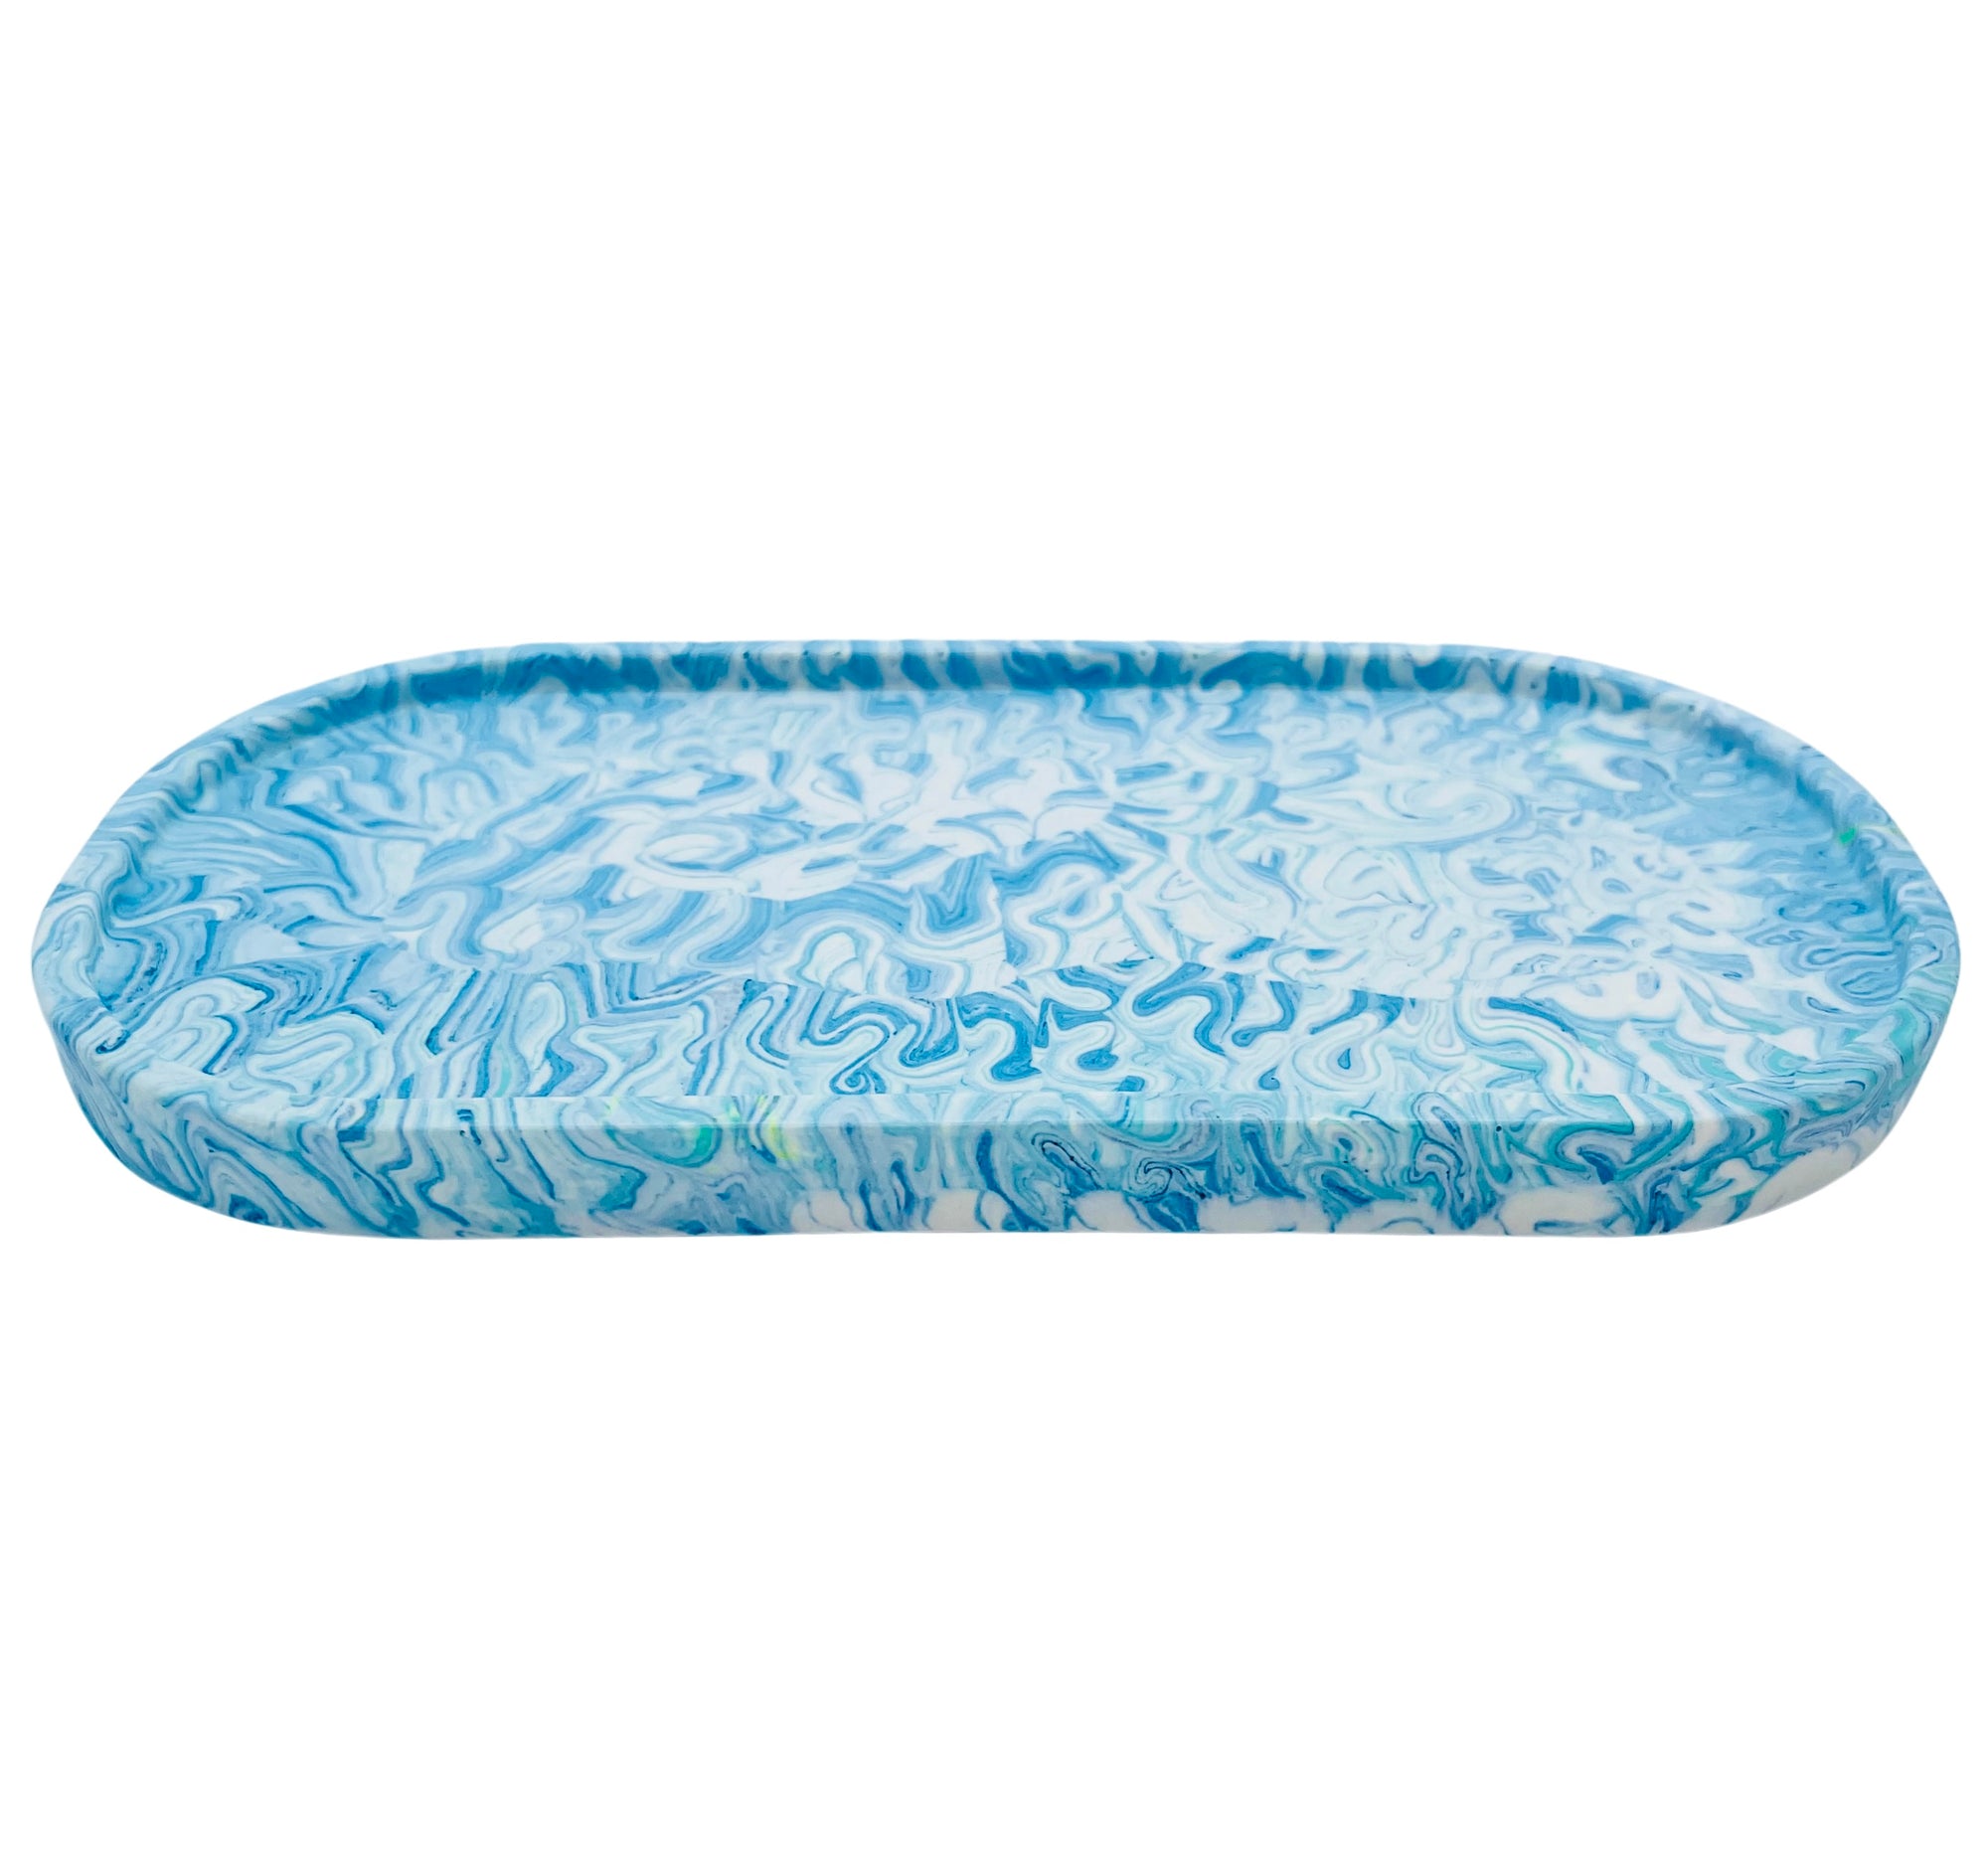 An oval Jesmonite trinket tray marbled with baby blue and turquoise pigment.